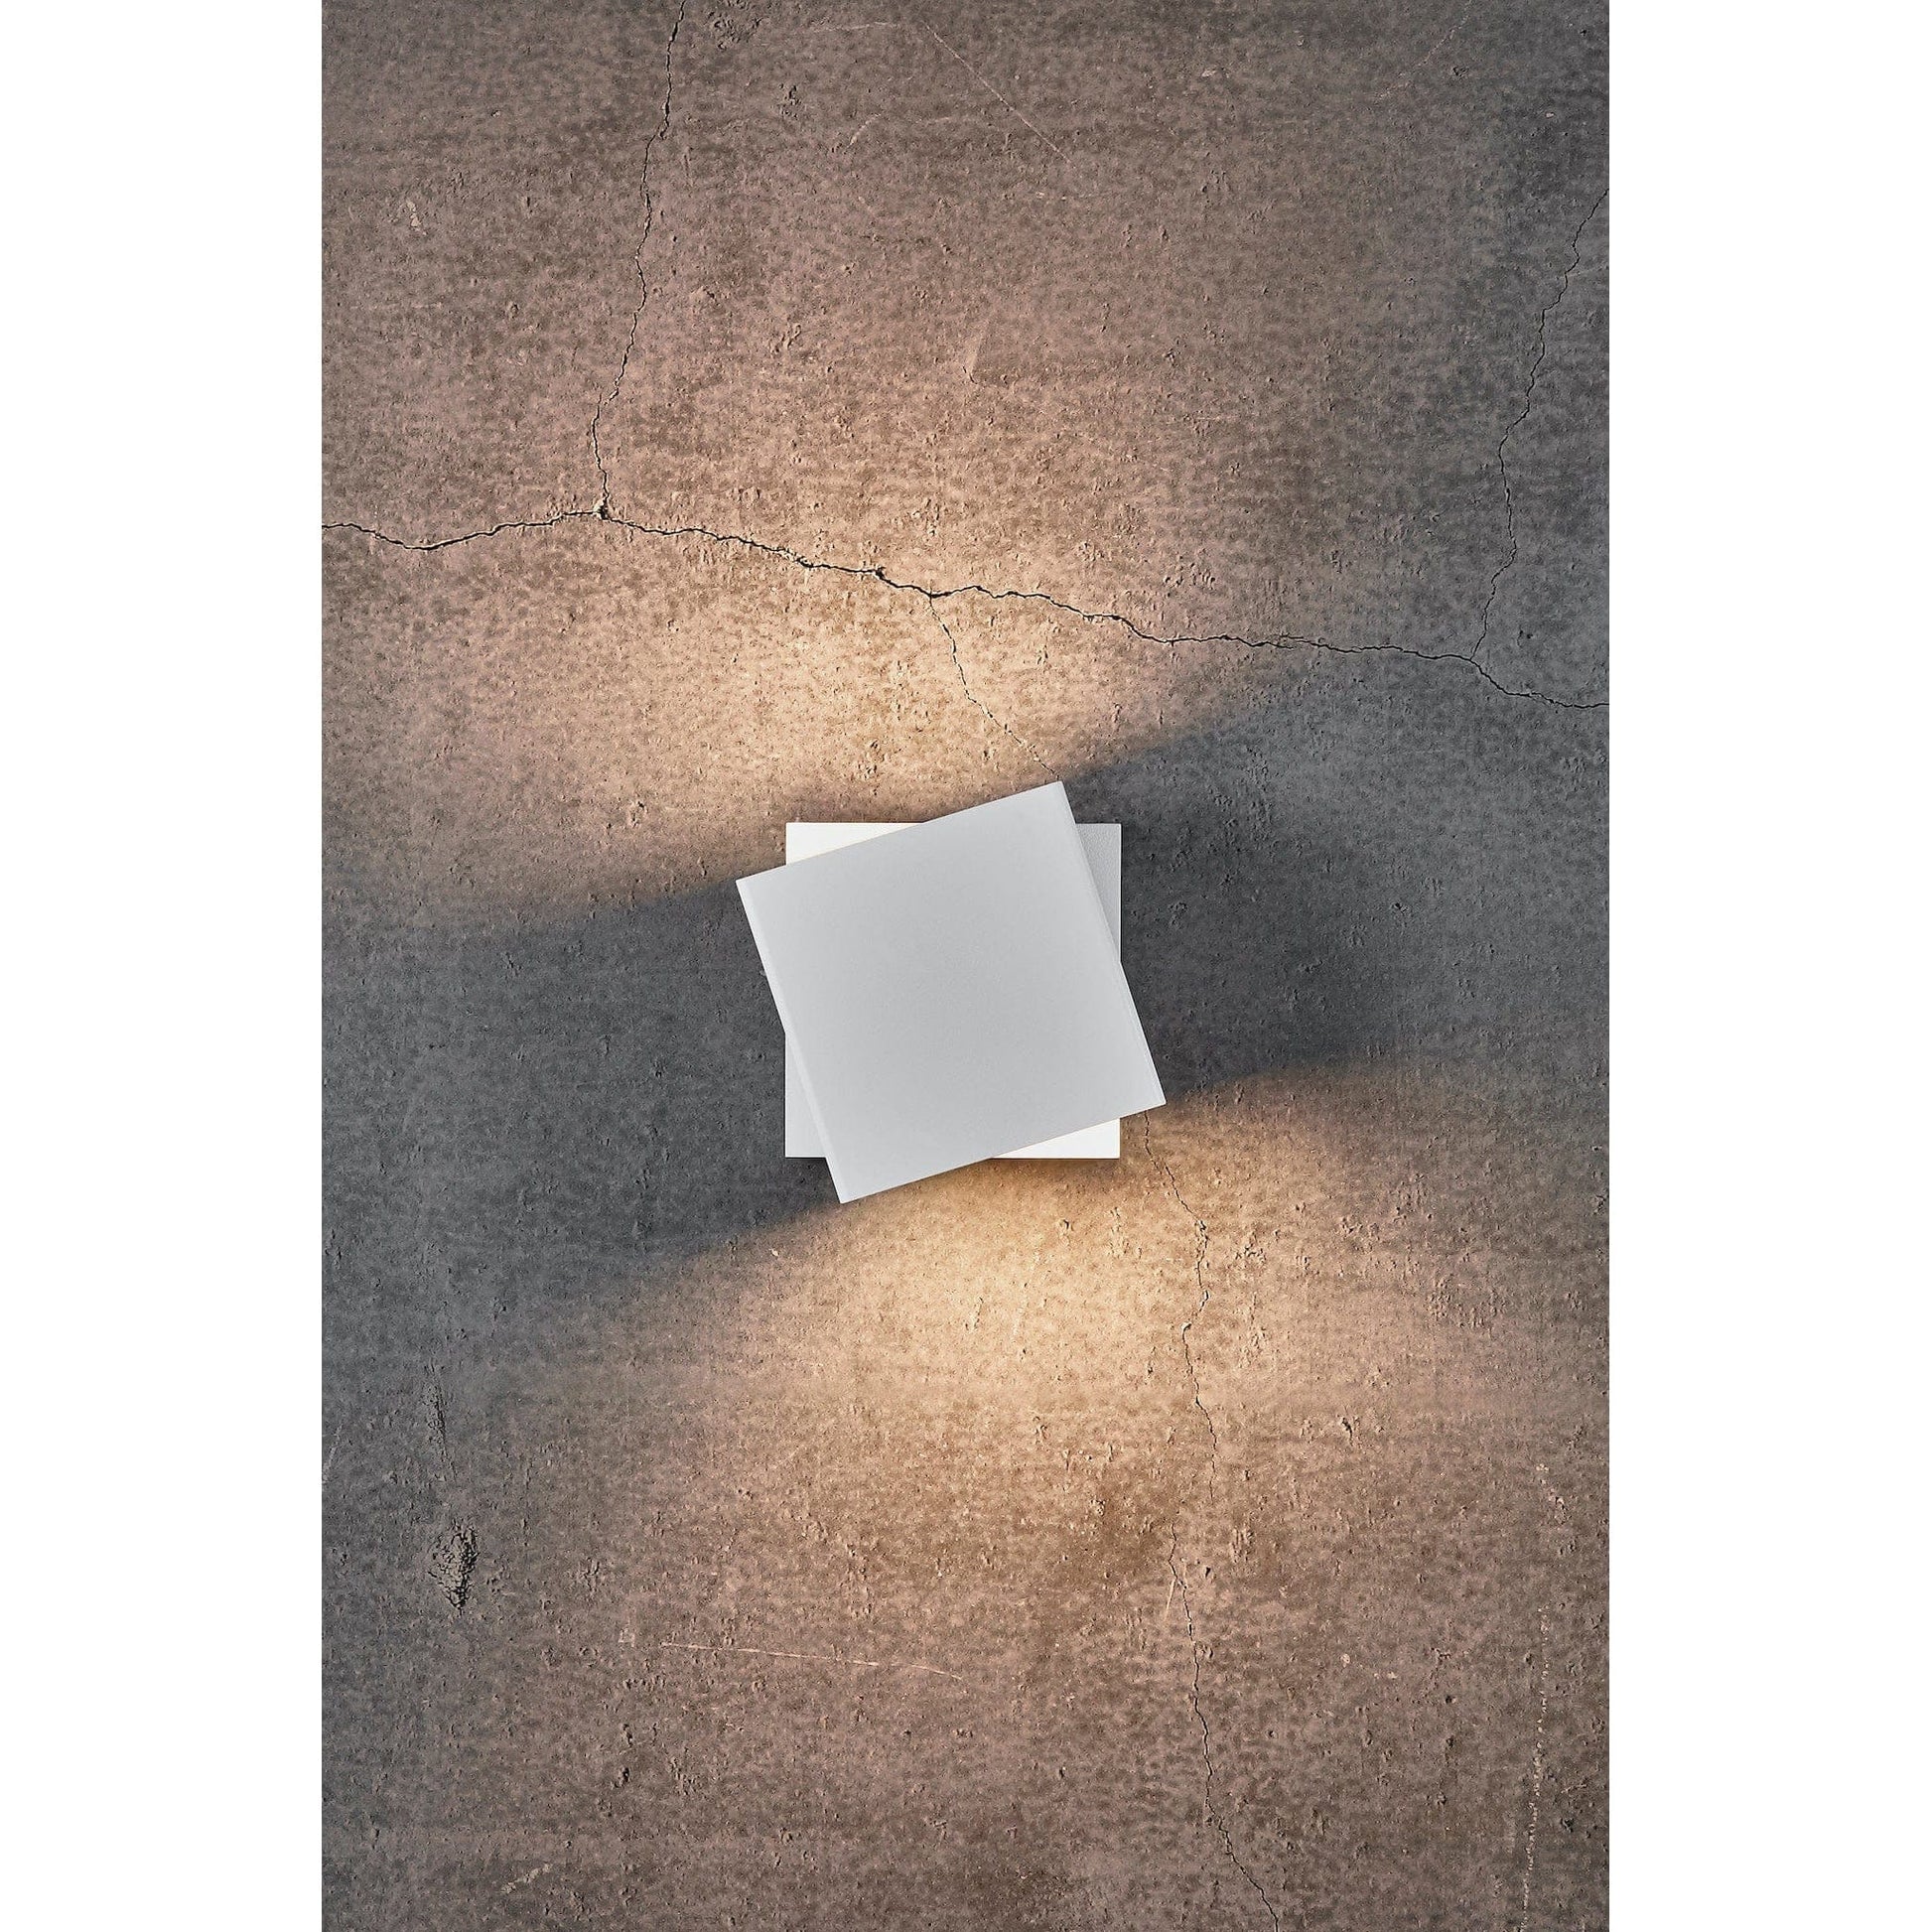 Nordlux Wall Lights Turn Outdoor / Indoor Wall Light, black or white